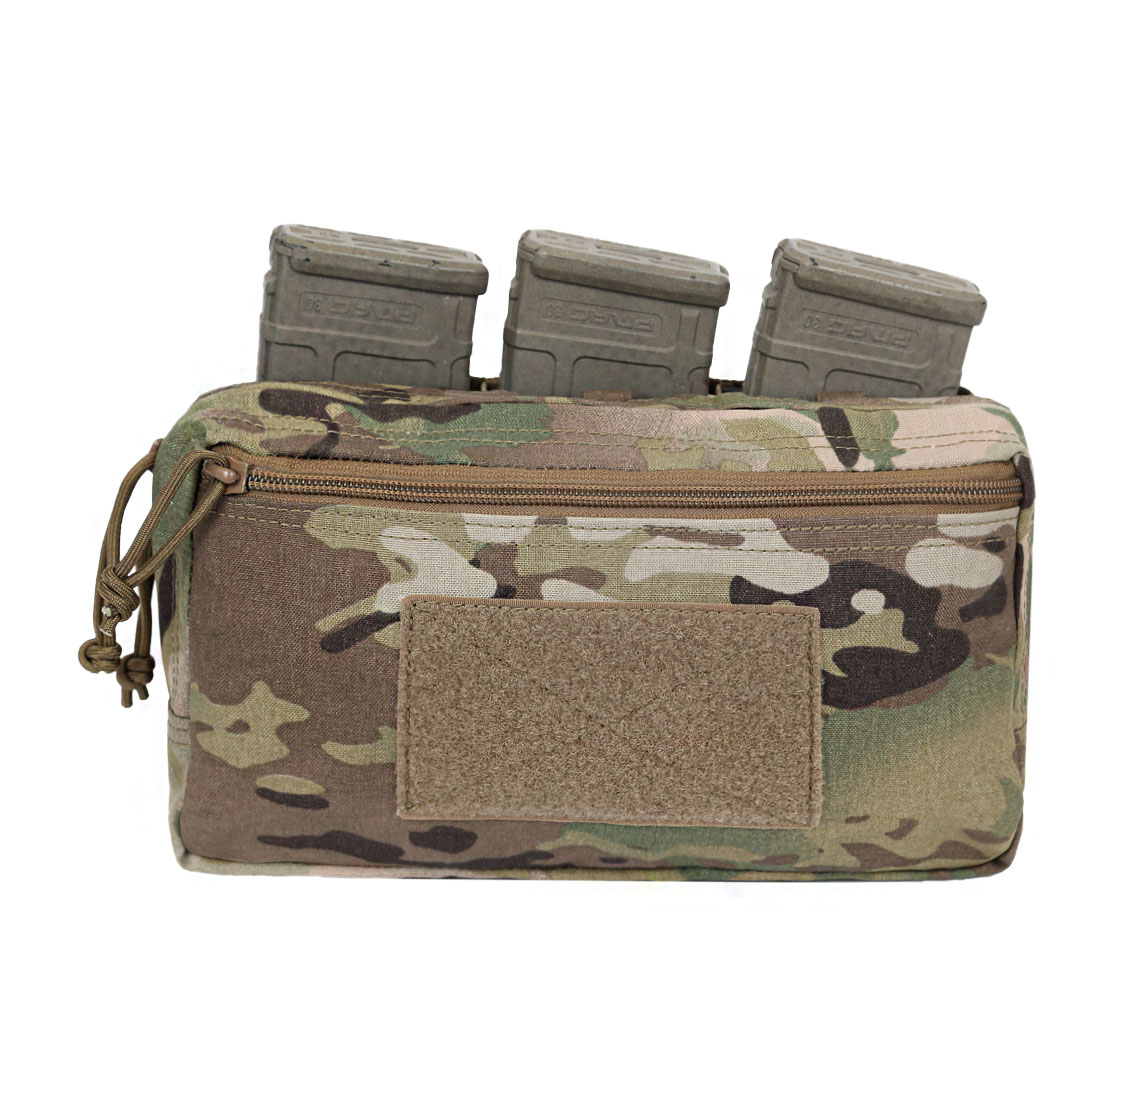 Ranger Elite Tactical Drop Leg Holster with Magazine Clip Storage Pouch -  Olive Drab Green